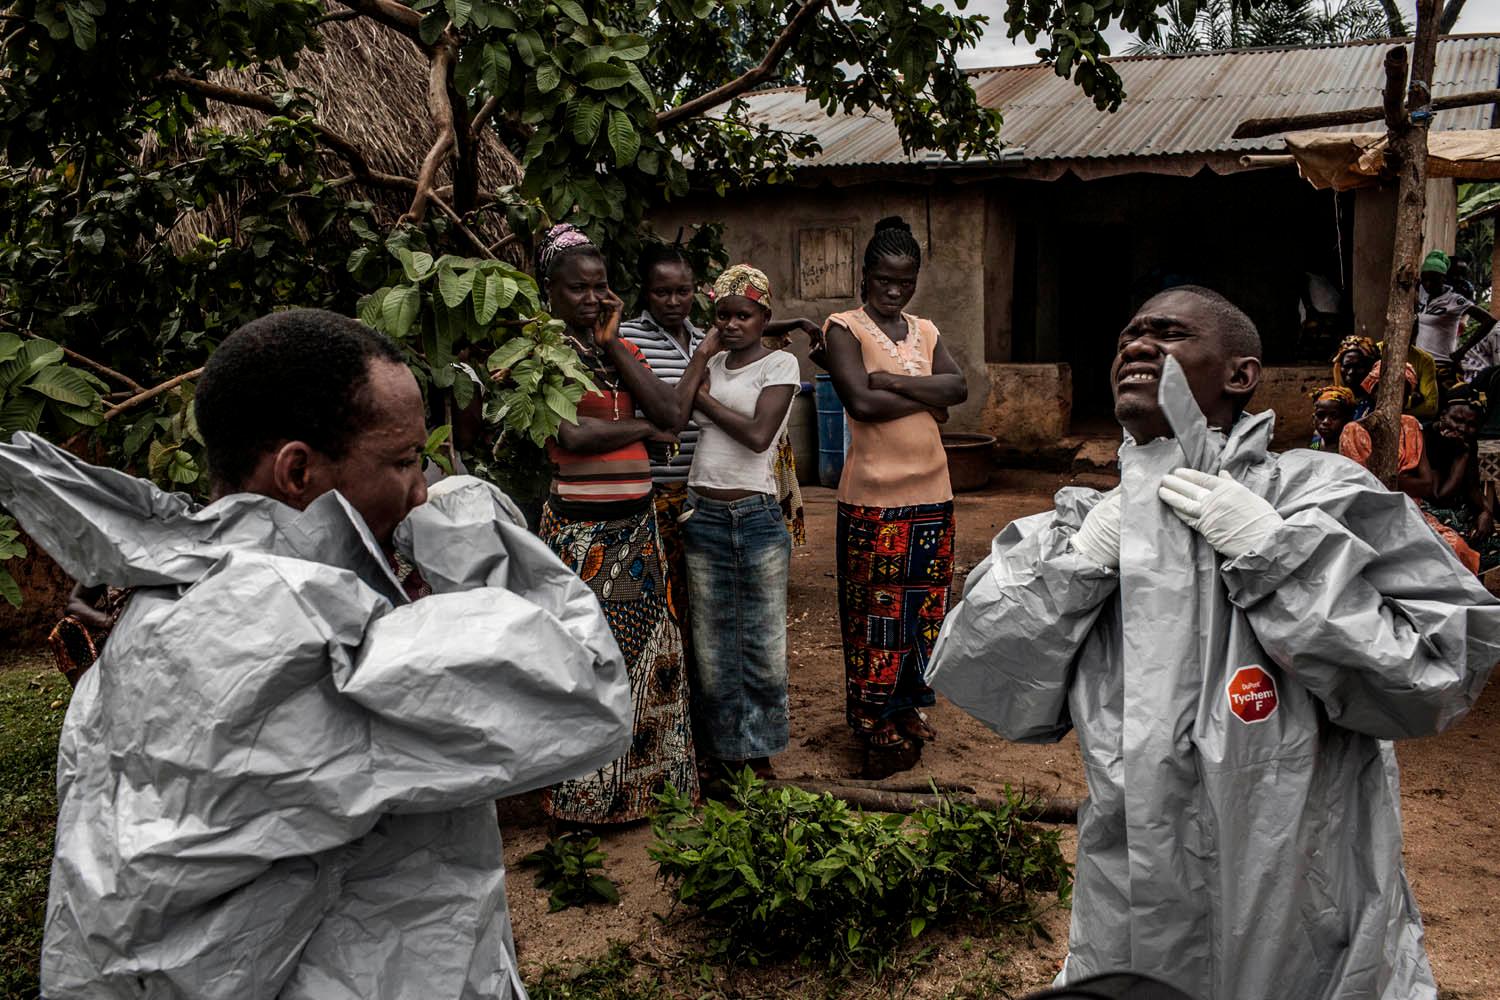 Members of a Red Cross burial team put on personal protective equipment before entering the home of a woman suspected of dying of Ebola in the village of Dia on Monday, August 18, 2014.